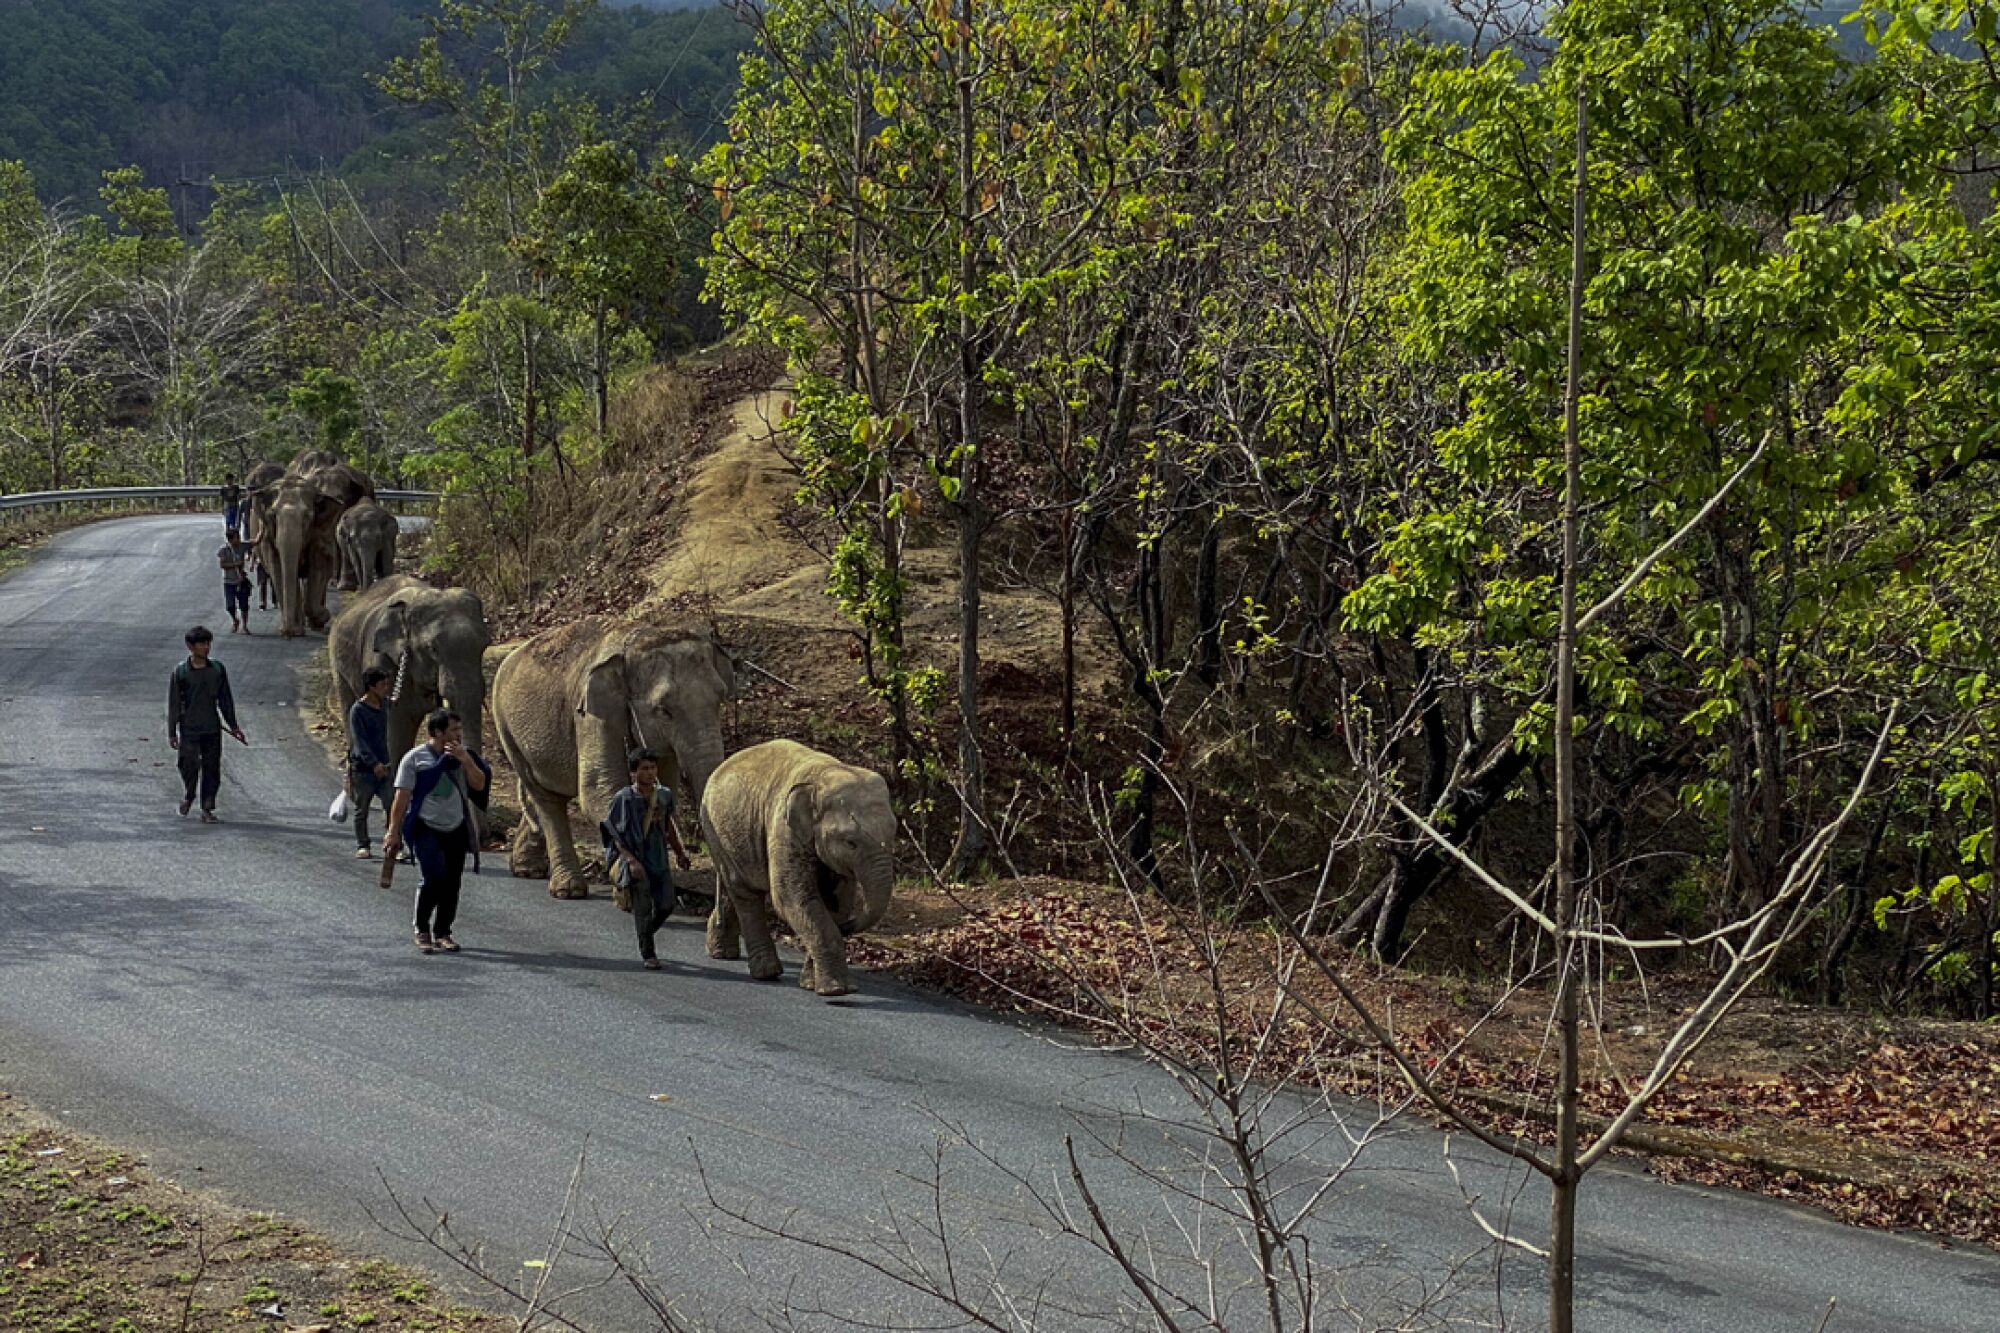 The elephants can maintain a walking speed of 4.5 mph.